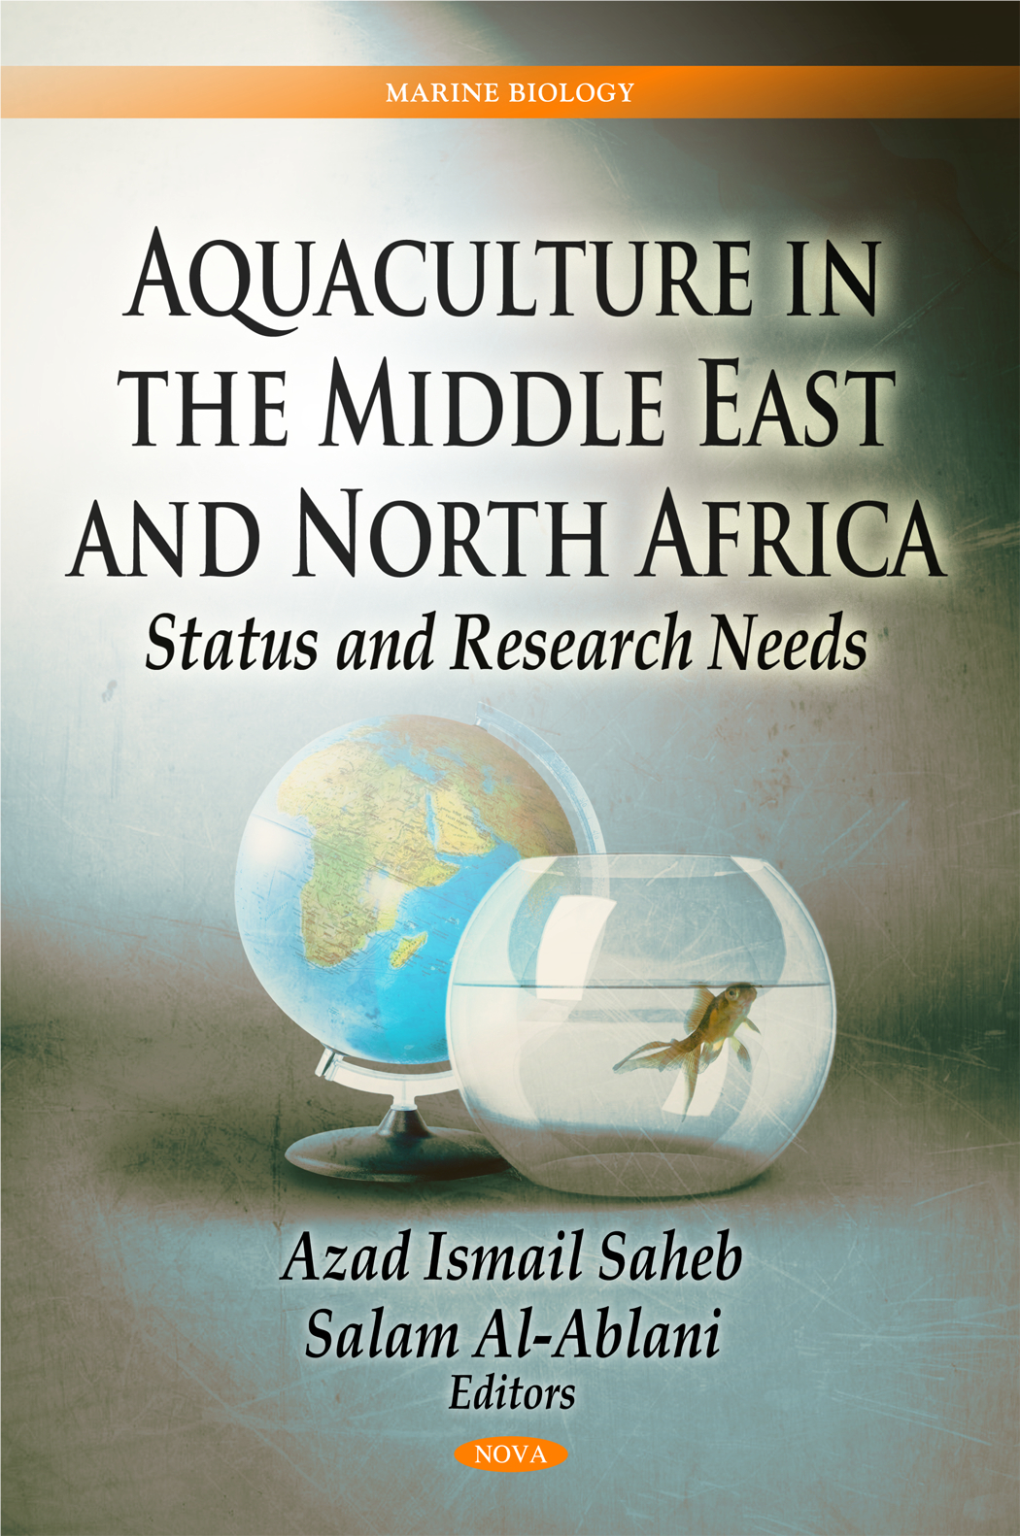 Aquaculture in the Middle East and North Africa: Status and Research